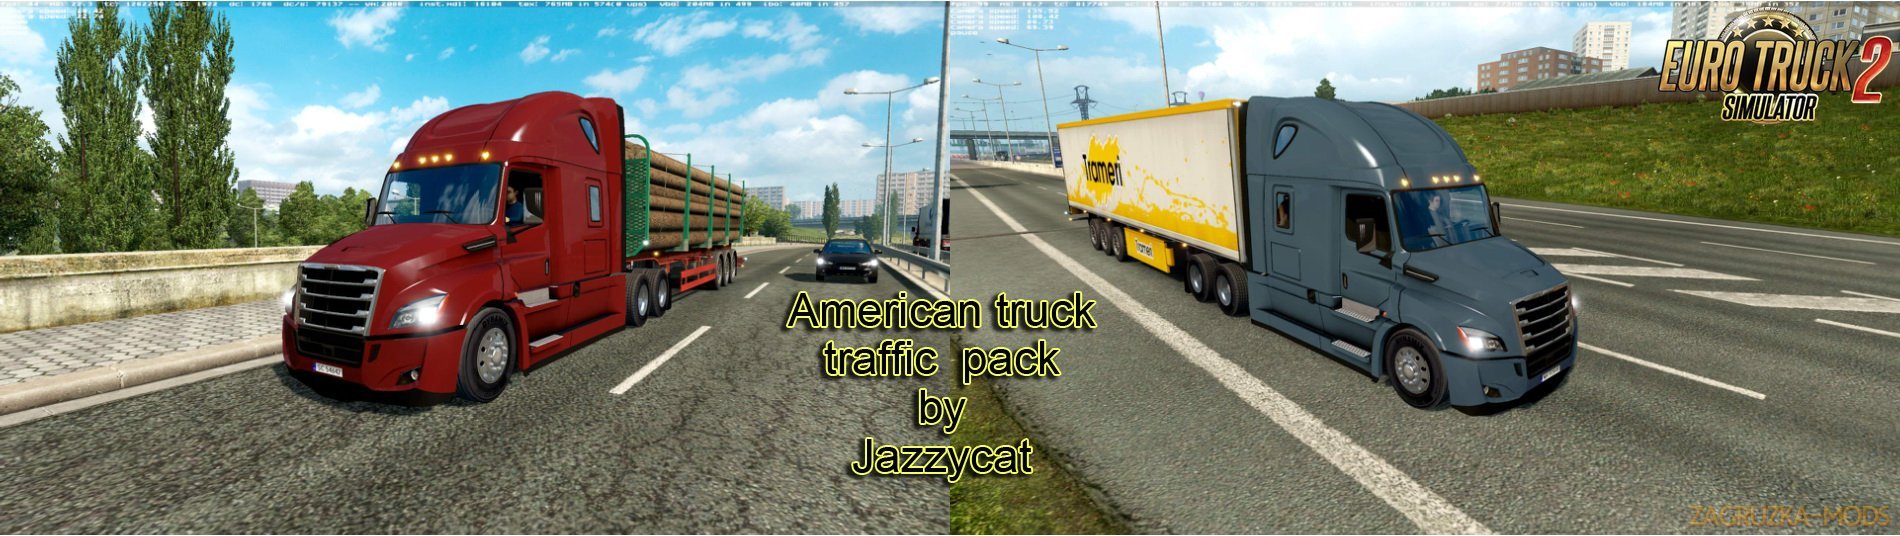 American Truck Traffic Pack v1.5  by Jazzycat